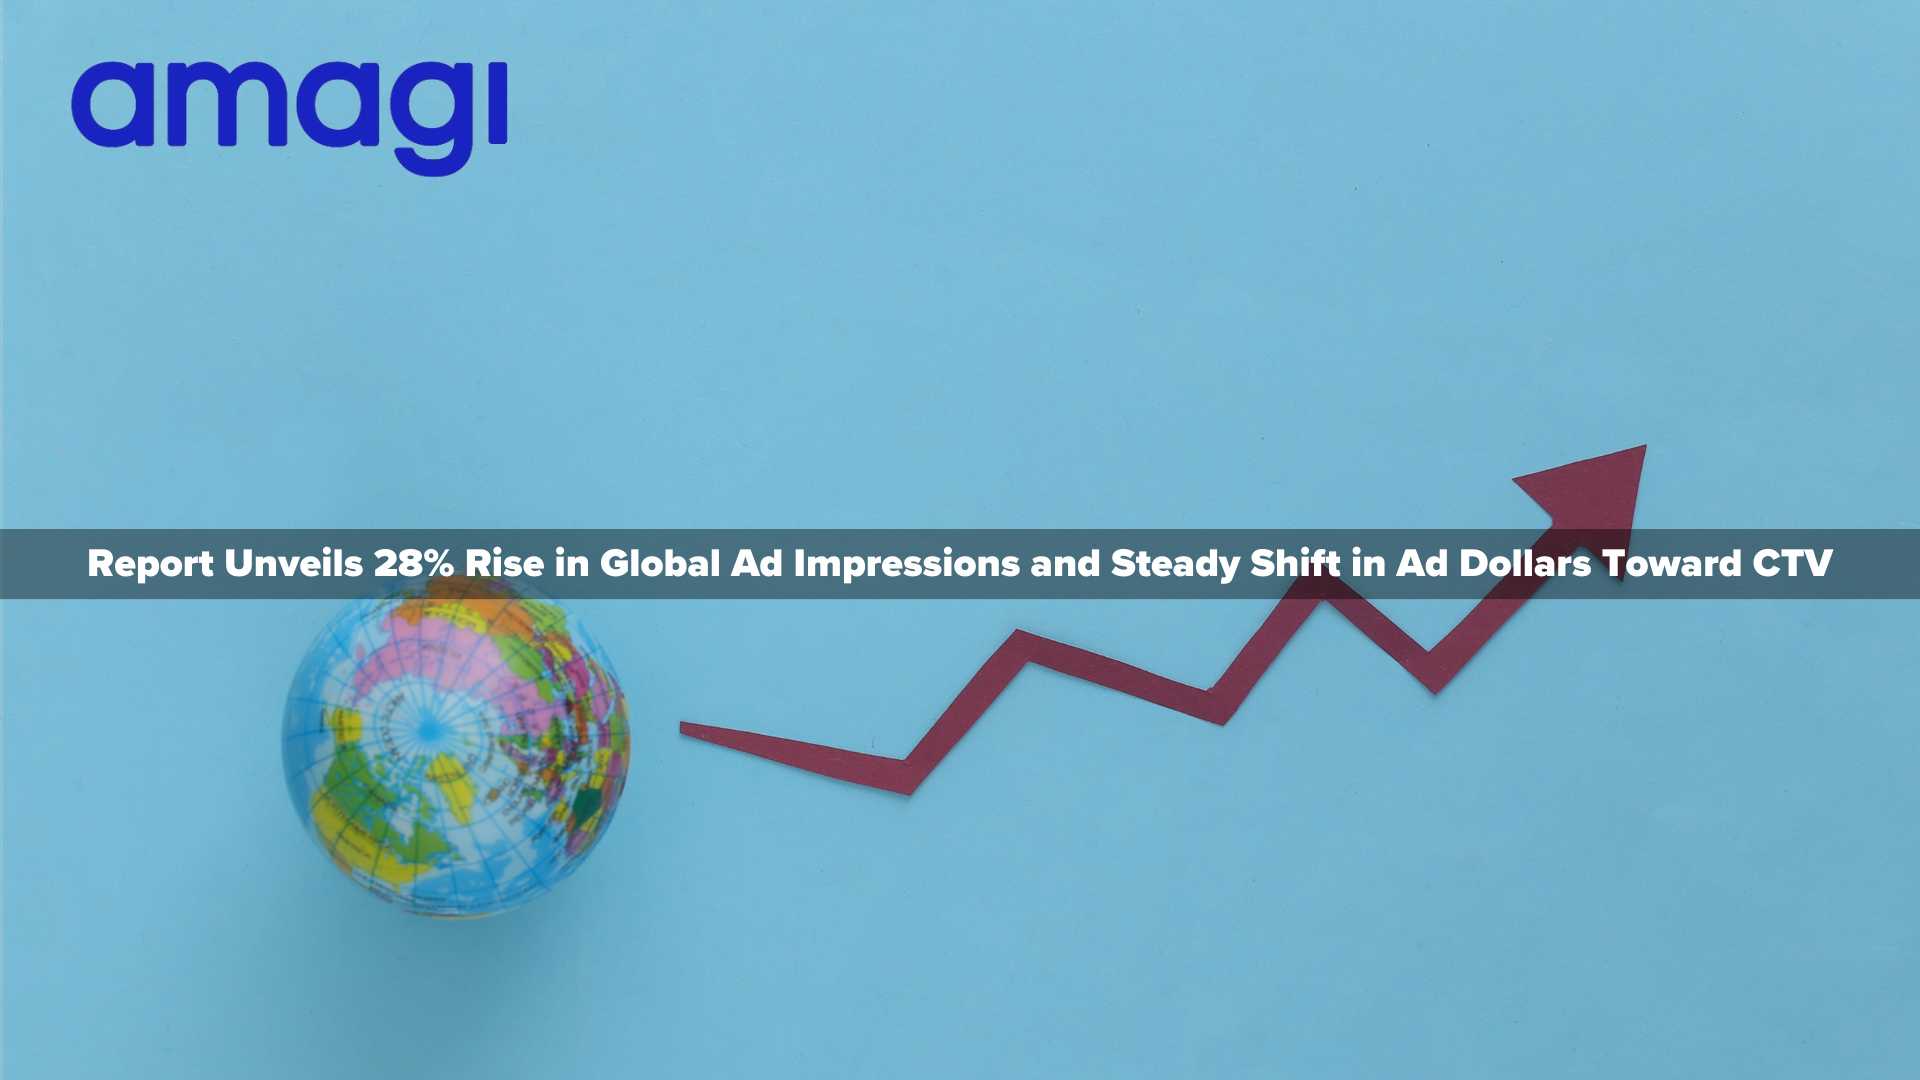 Amagi's 10th FAST Report Unveils 28% Rise in Global Ad Impressions and Steady Shift in Ad Dollars Toward CTV